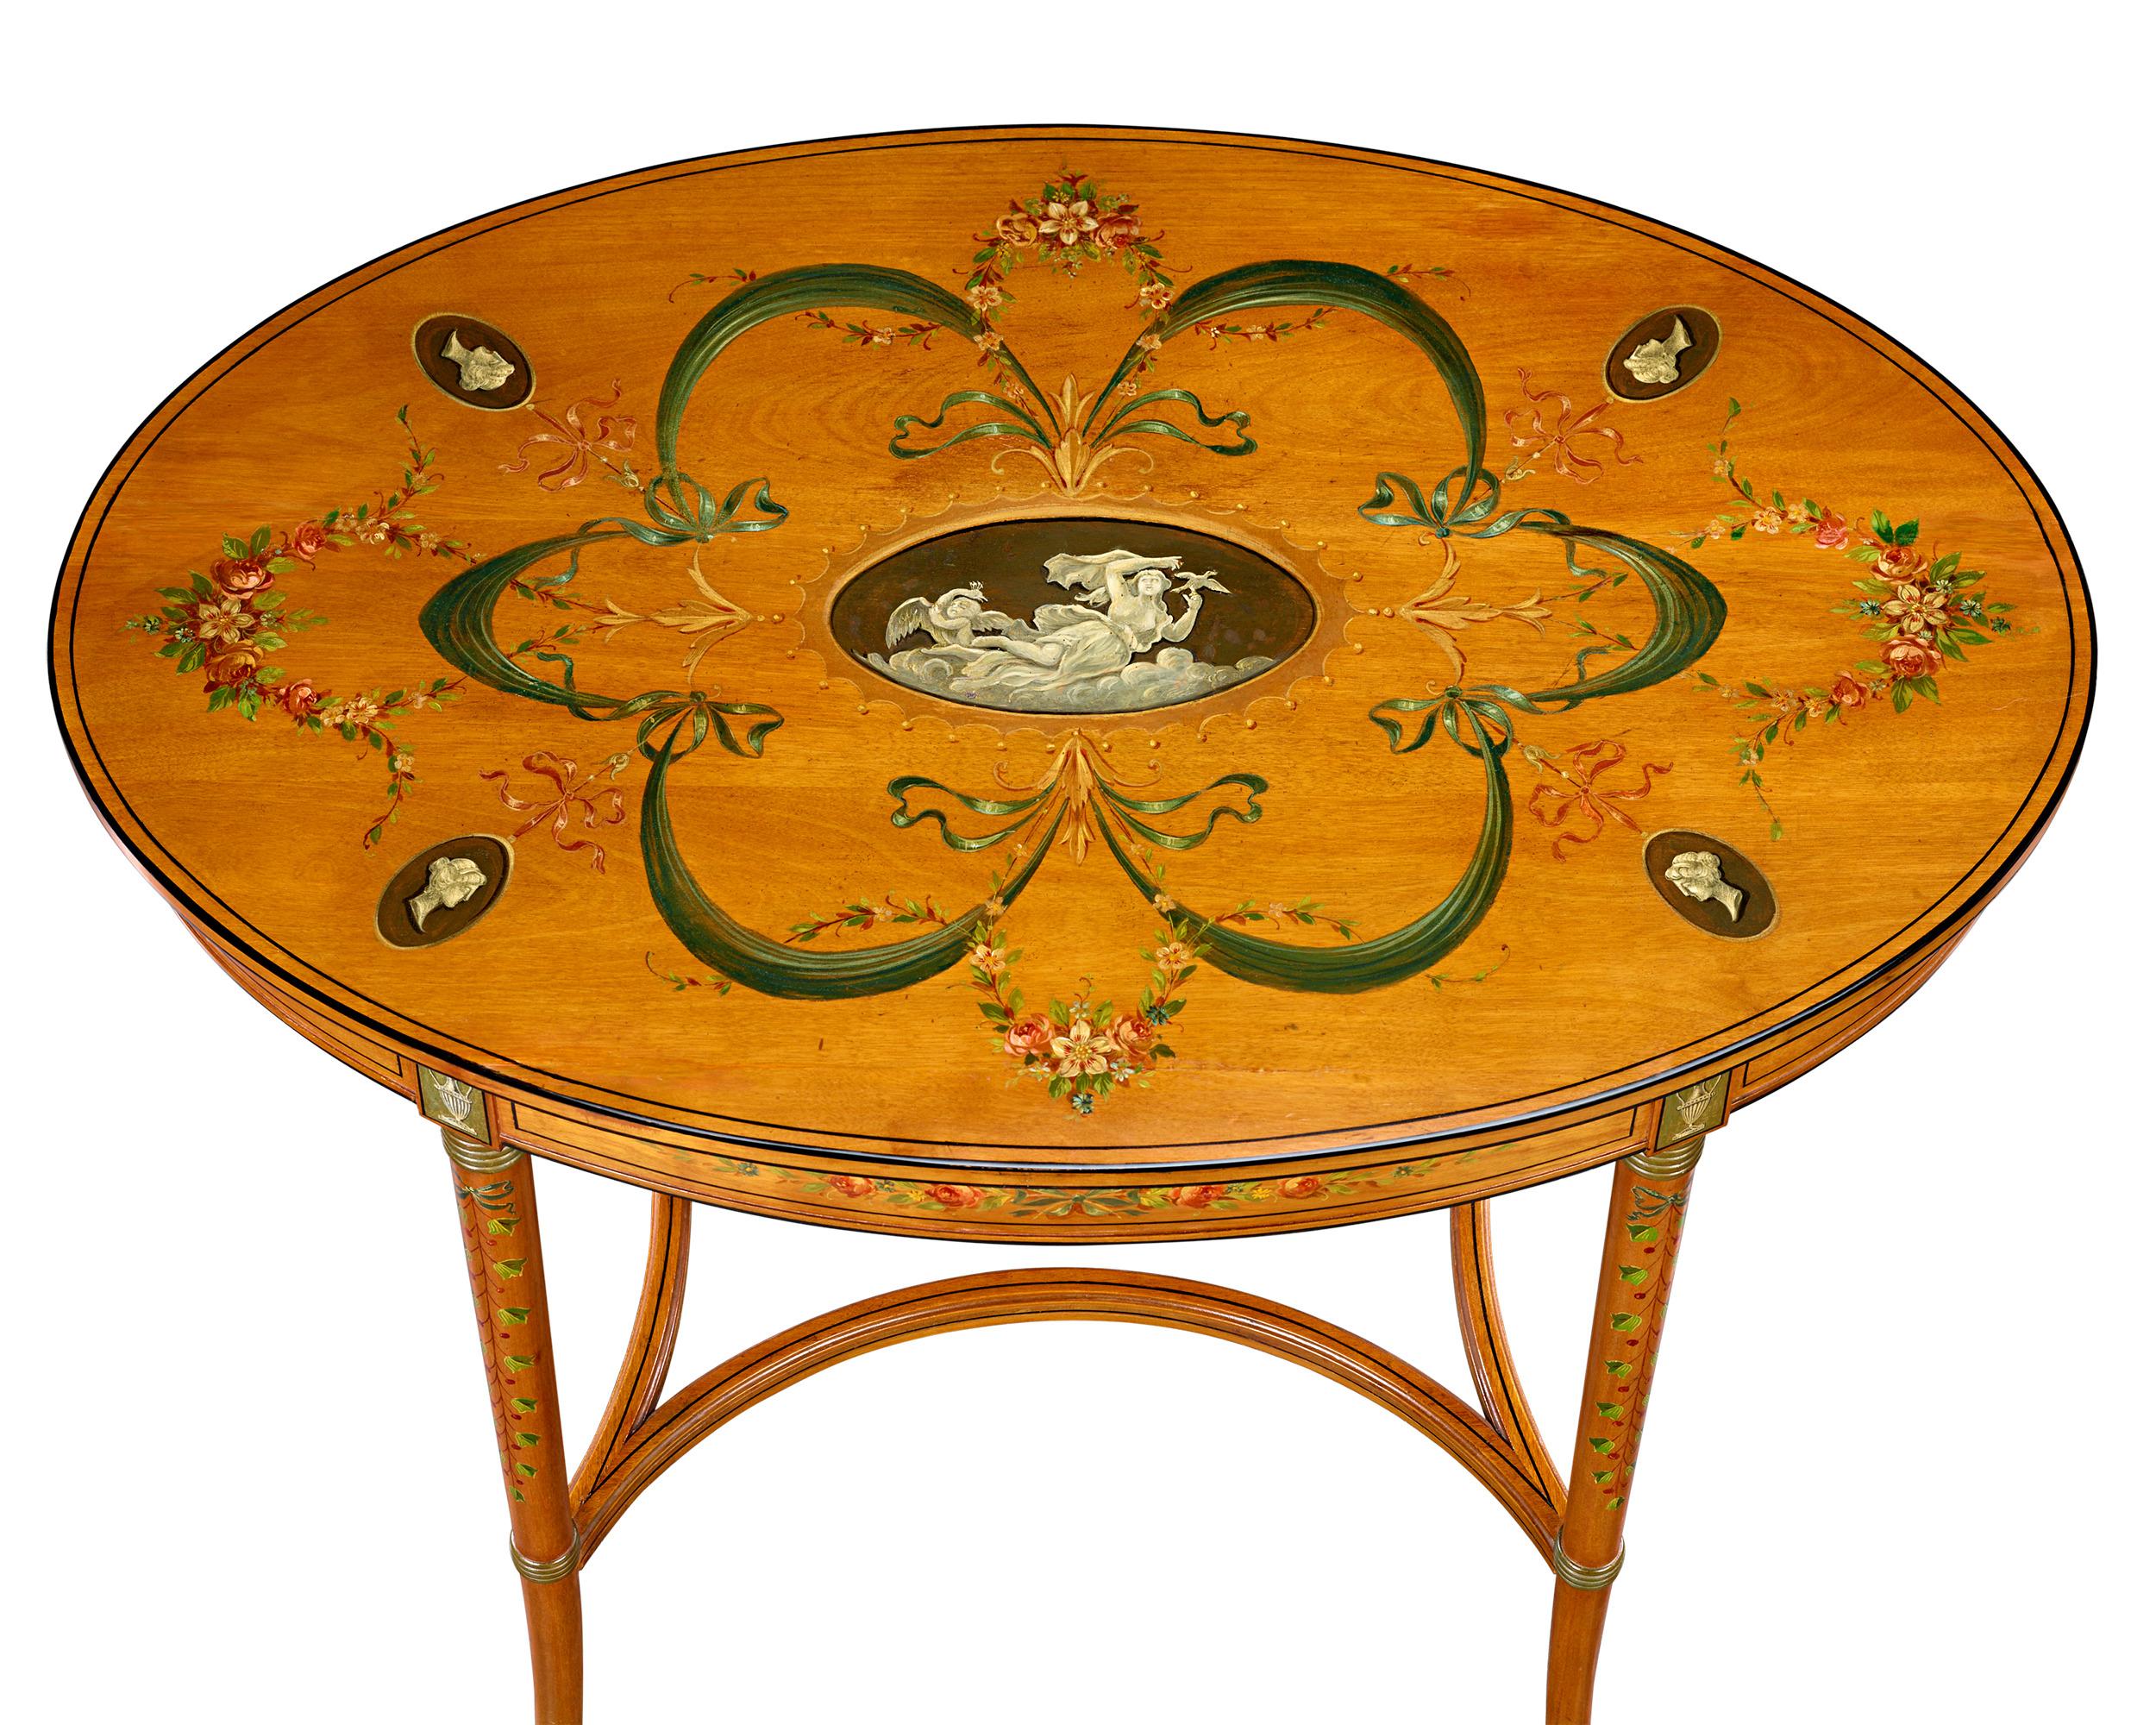 This exquisite pair of hand-painted English satinwood parlor tables is embellished with intricate detailing inspired by floral and classical themes—hallmarks of the esteemed Sheraton Revival style. The fine wood and masterfully delicate natural